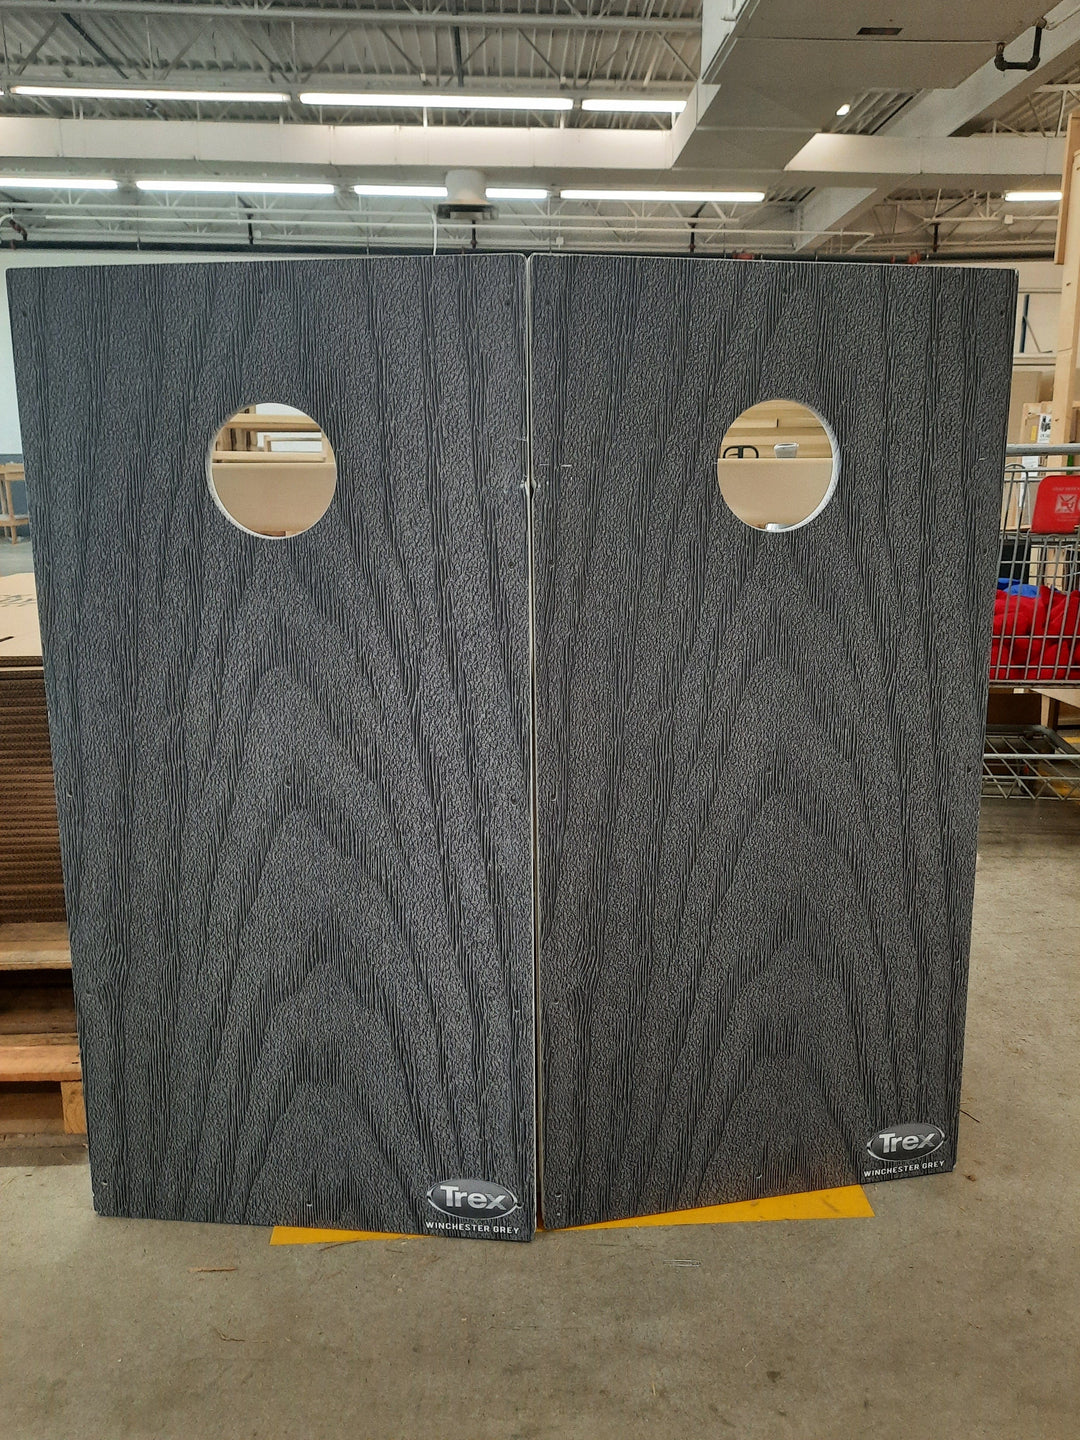 Slick Woody’s Scratch and Dent SD005 2'x 4' All-Weather Cornhole Boards